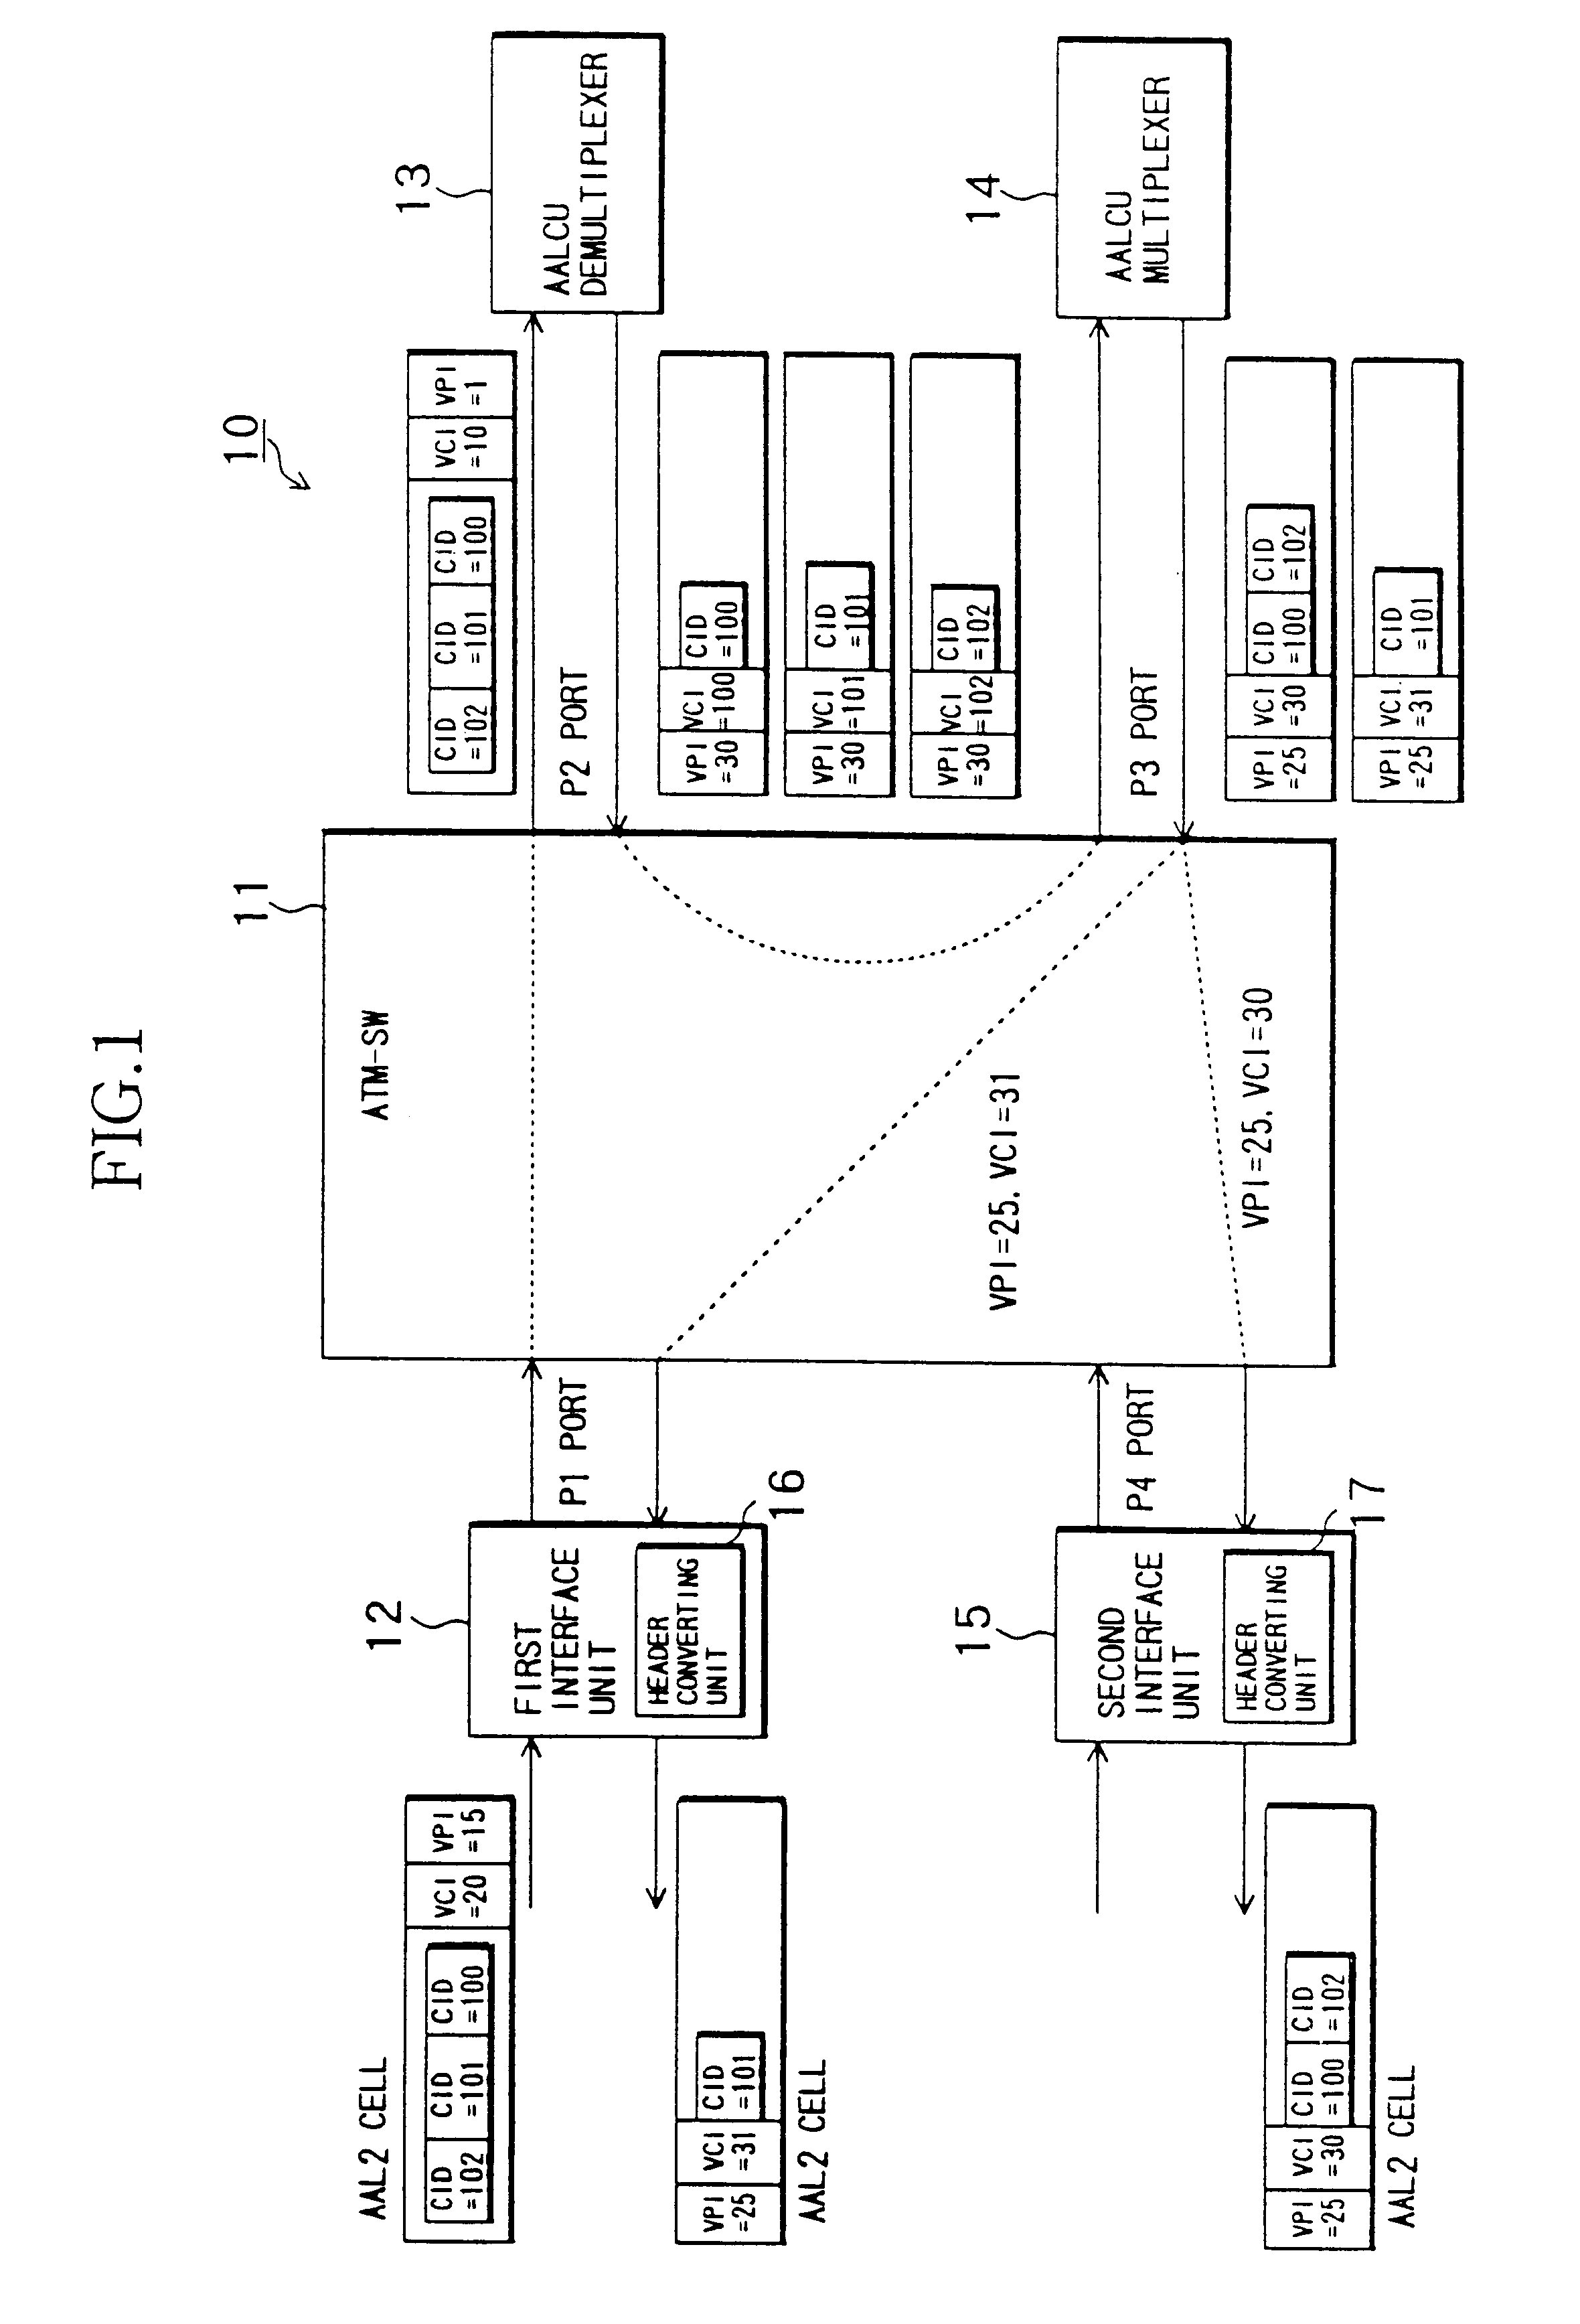 ATM switching apparatus applicable to short cell